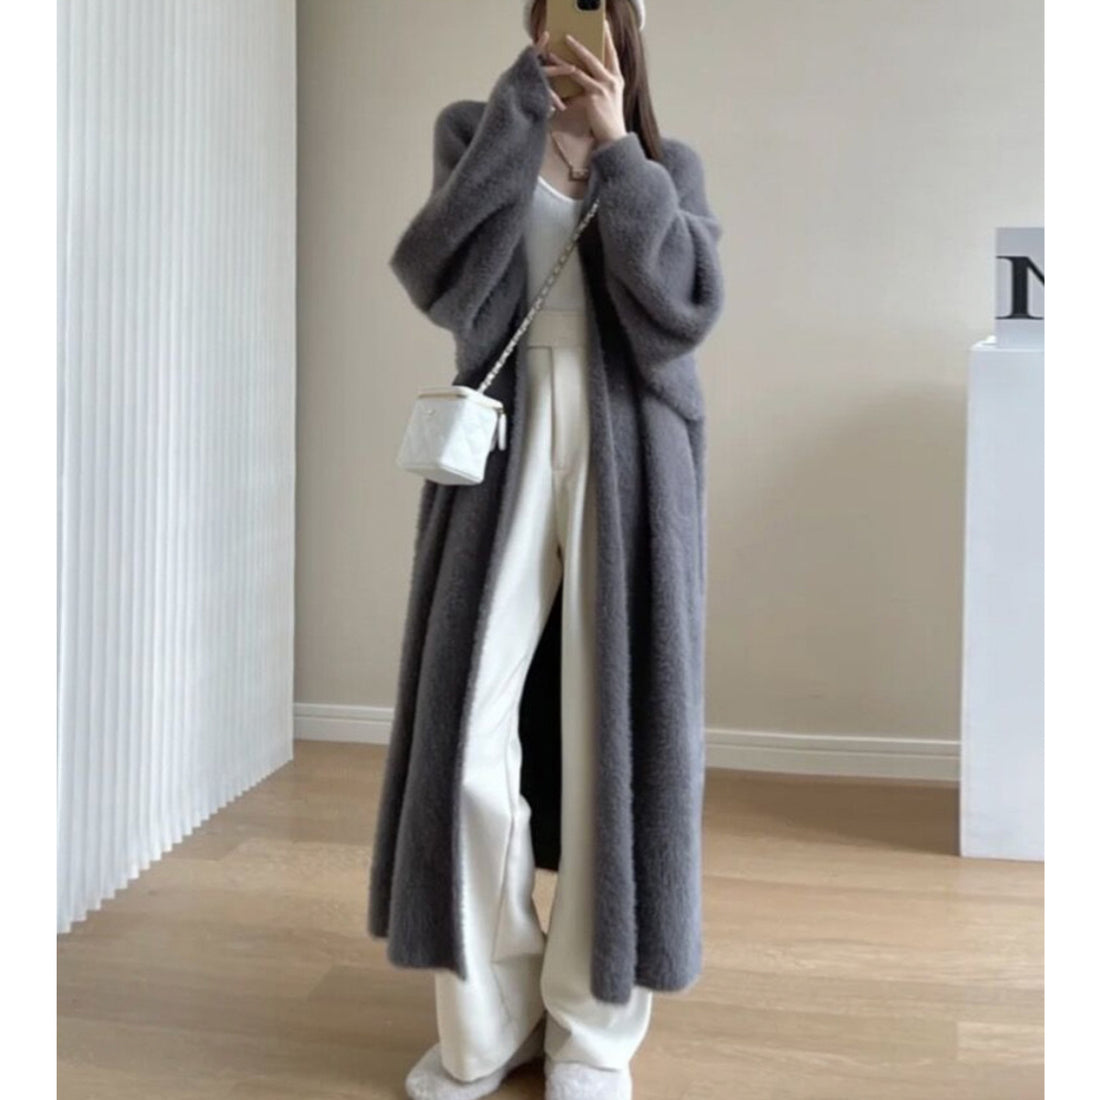 Soft Long Cardigan Coat, Trendy Leisure Warm Sweater, Basic Cozy Soft Daily Outfit, Office Wear Sweater, Cozy Knitted Retro Outfit